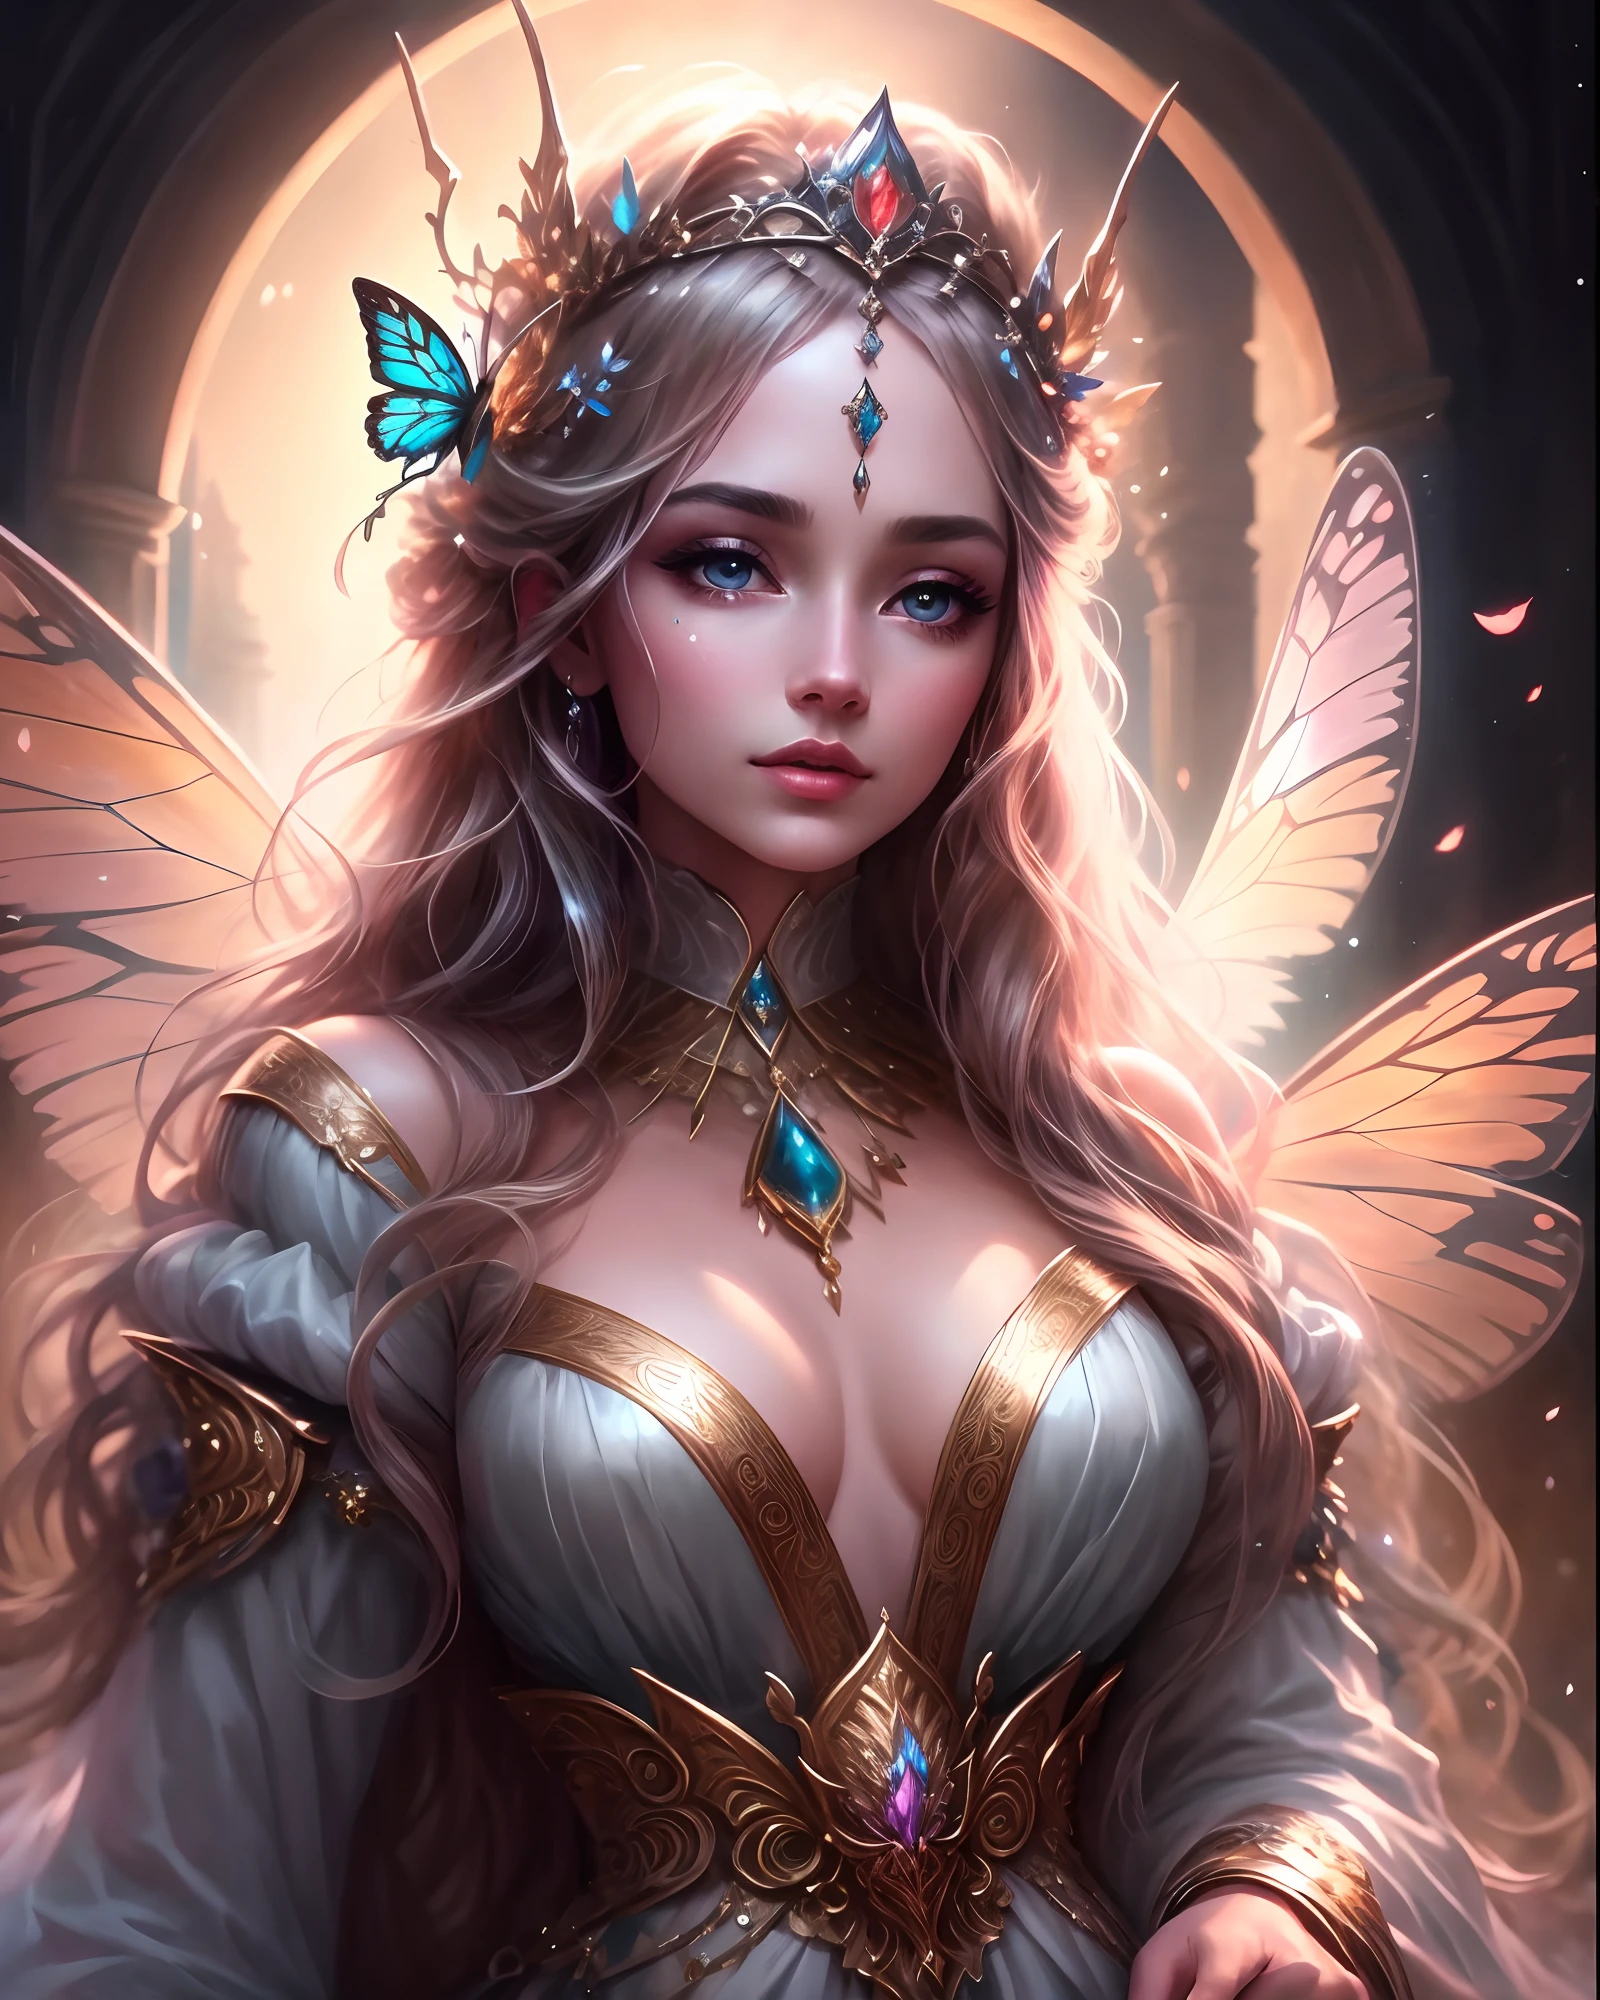 masterpiece, ultra wide shot, award winning shot, a woman with long hair and a crown on her head, beautiful butterfly wings on back, beautiful fantasy art, beautiful fantasy art portrait, beautiful fantasy portrait, very beautiful fantasy art, ethereal beauty, fantasy art style, detailed fantasy art, beautiful fantasy maiden, detailed fantasy digital art, beautiful maiden, digital fantasy art ), amazing fantasy art, a stunning portrait of a goddess, fantasy art portrait, beautiful detailed fantasy, Canon 2000D, UHD